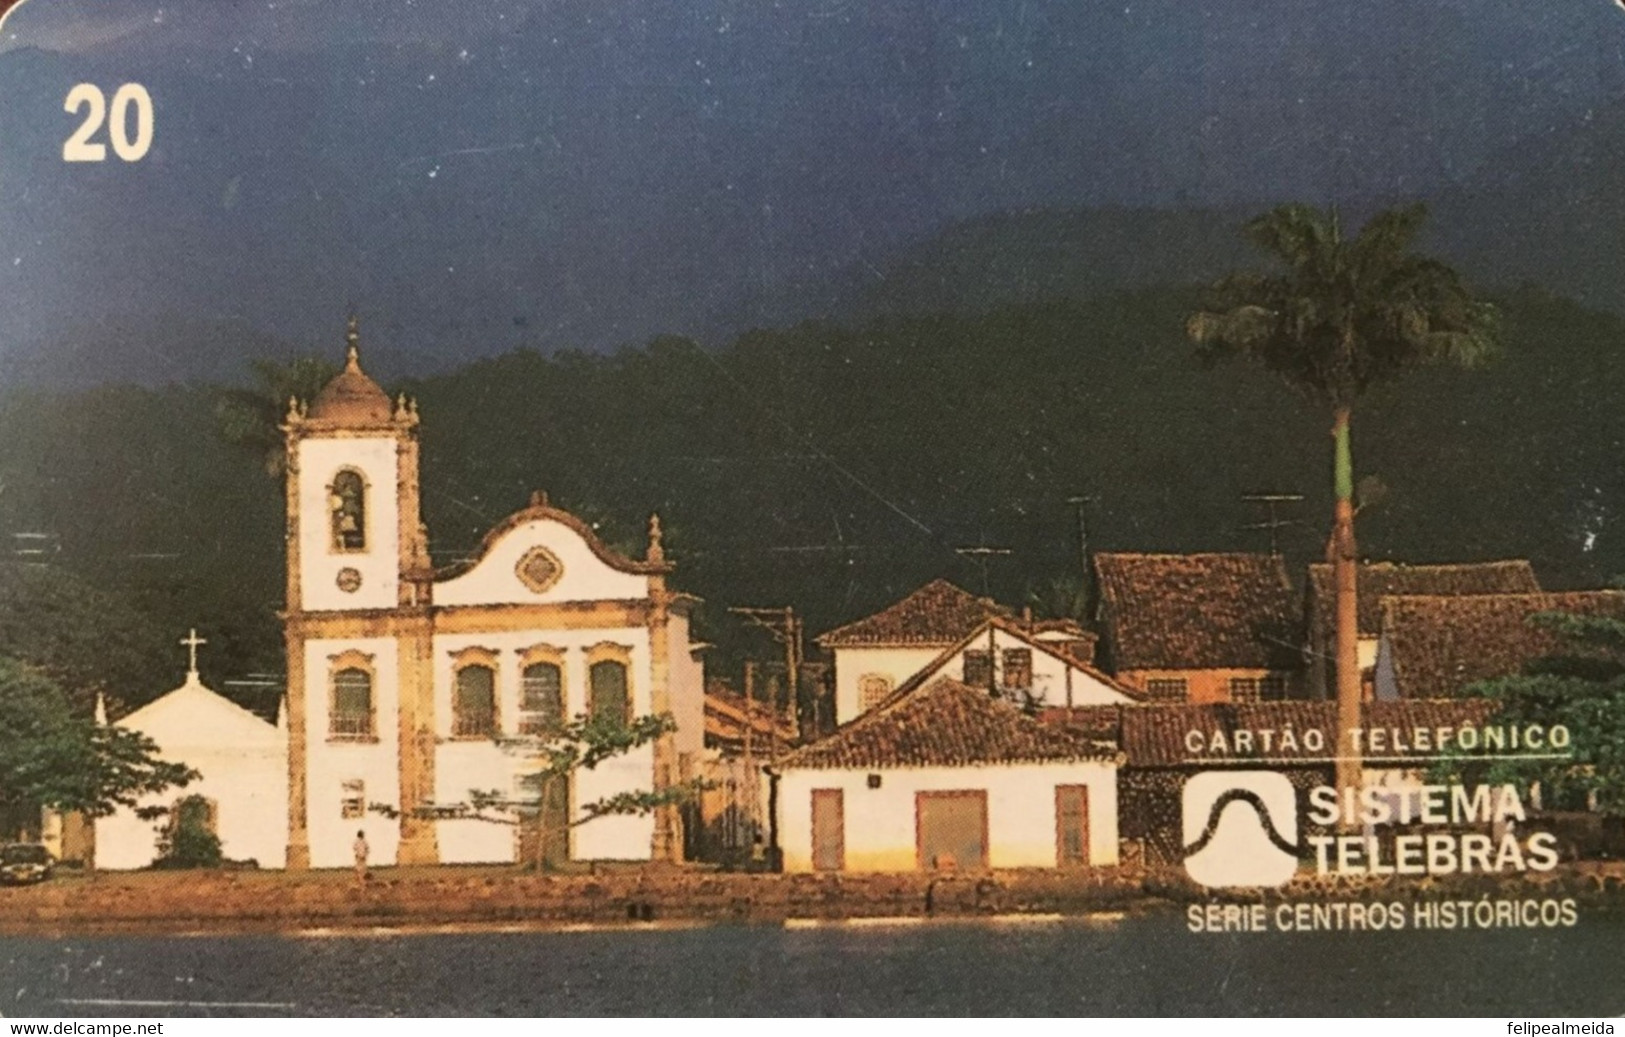 Phone Card Produced By Telebras In 1999 - Series Historic Centers - Photo Of The Building Of The National Historic Museu - Cultura